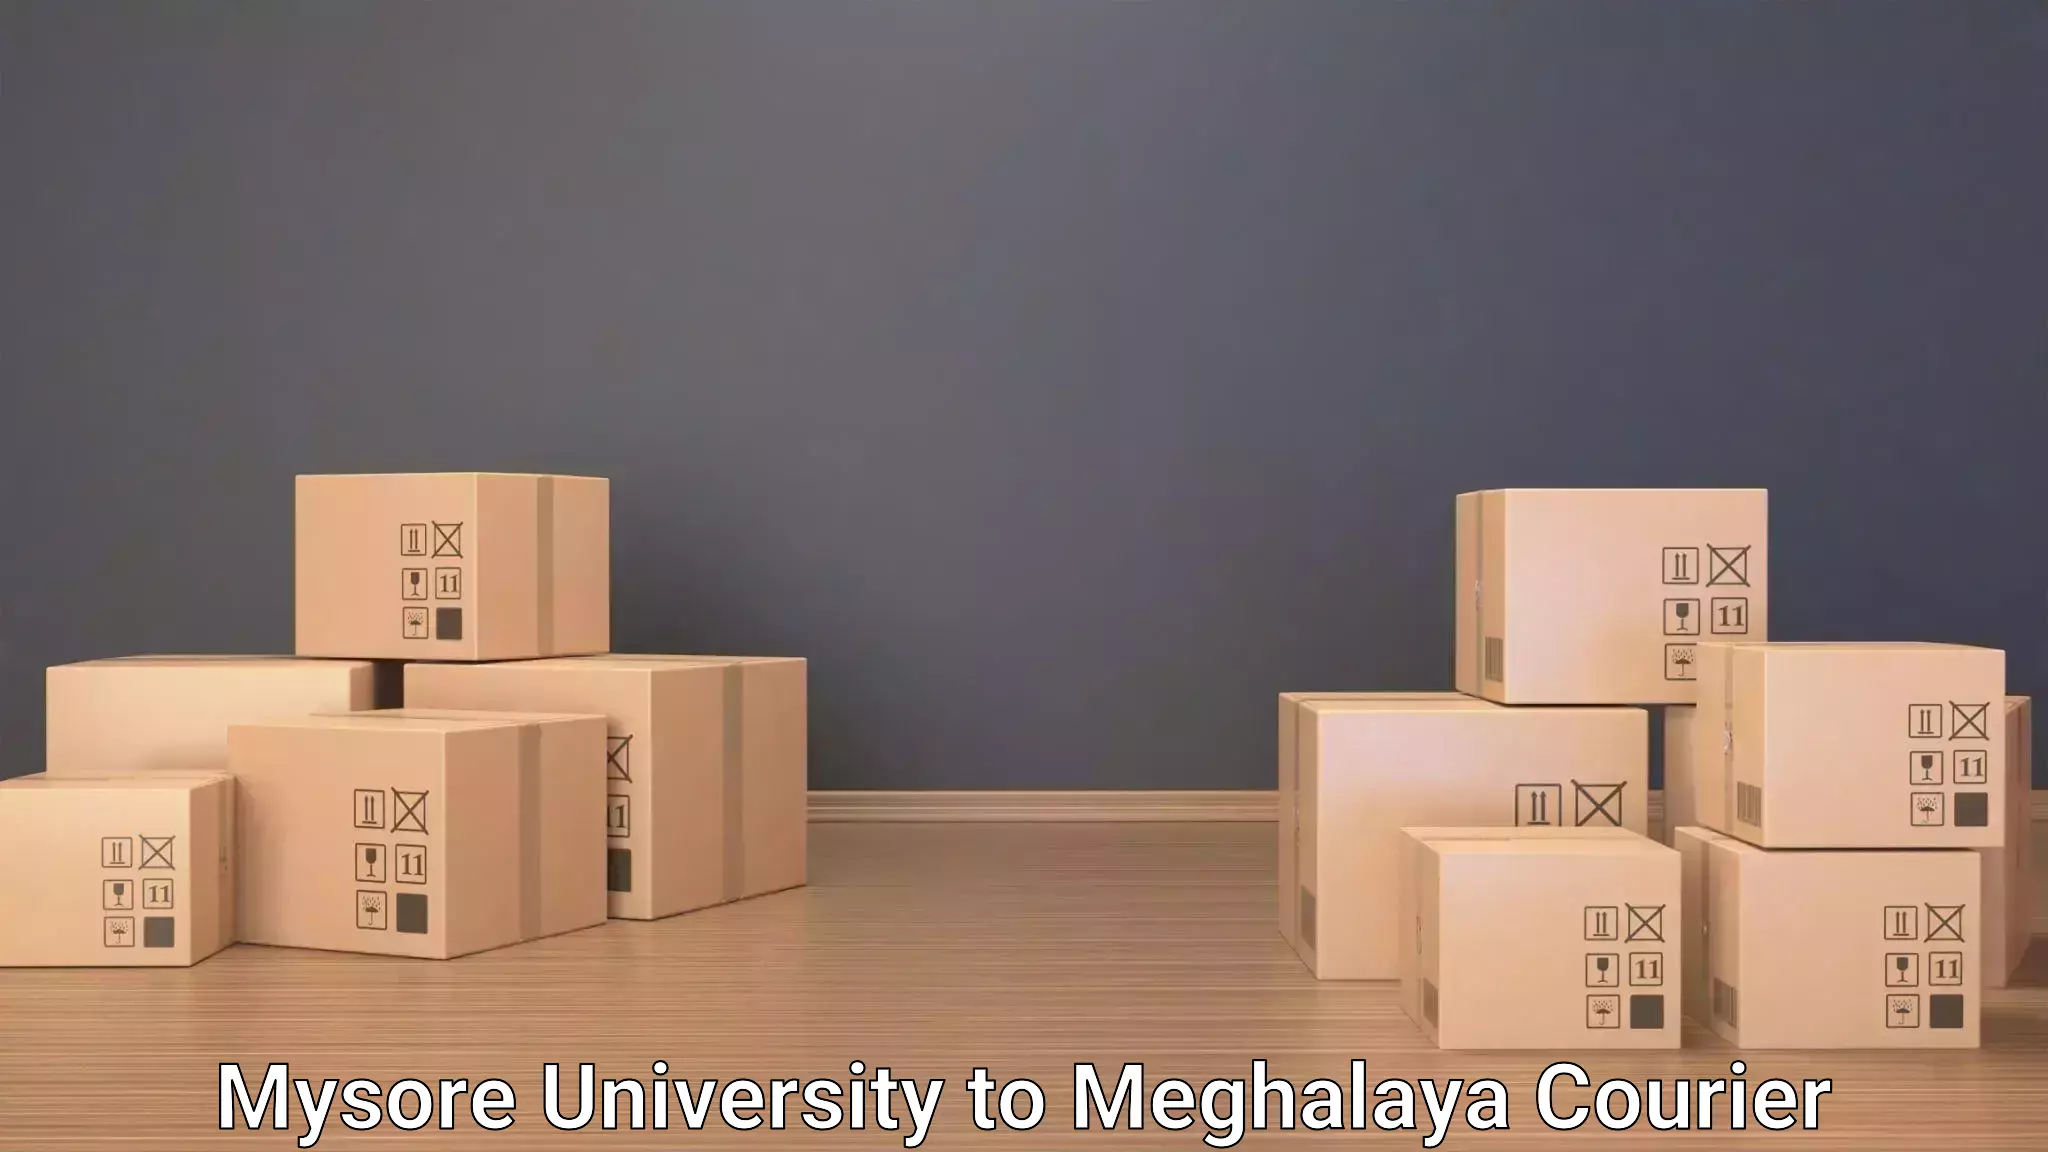 Luggage storage and delivery Mysore University to Nongstoin